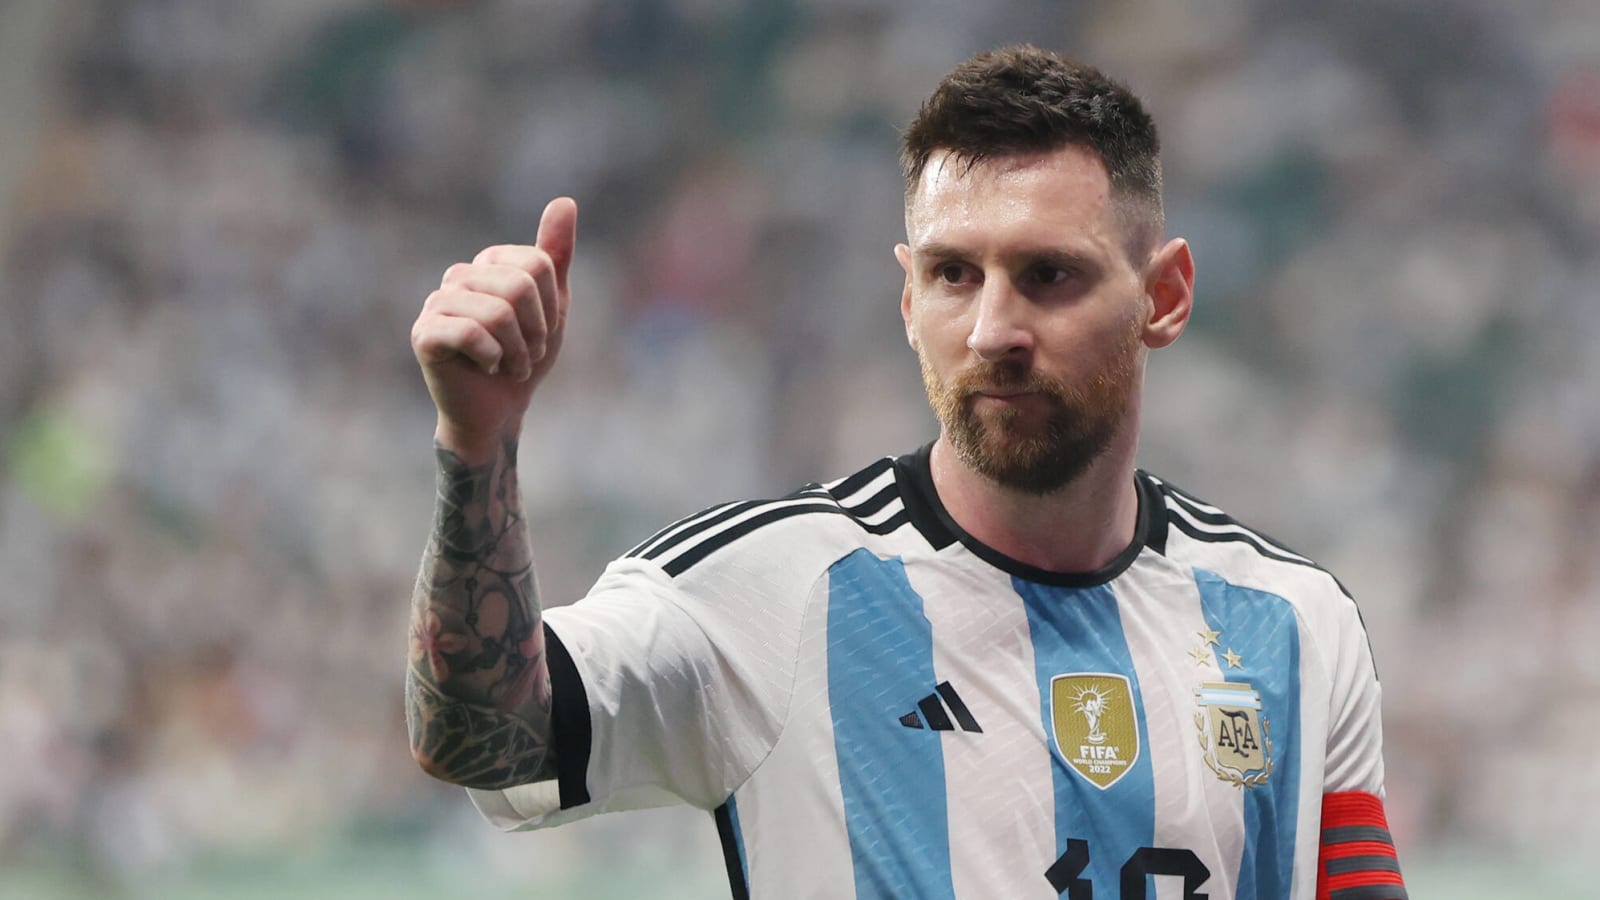 US fans will understand Lionel Messi’s standing in the game when the Gold Cup broadcast is interrupted by his unveiling